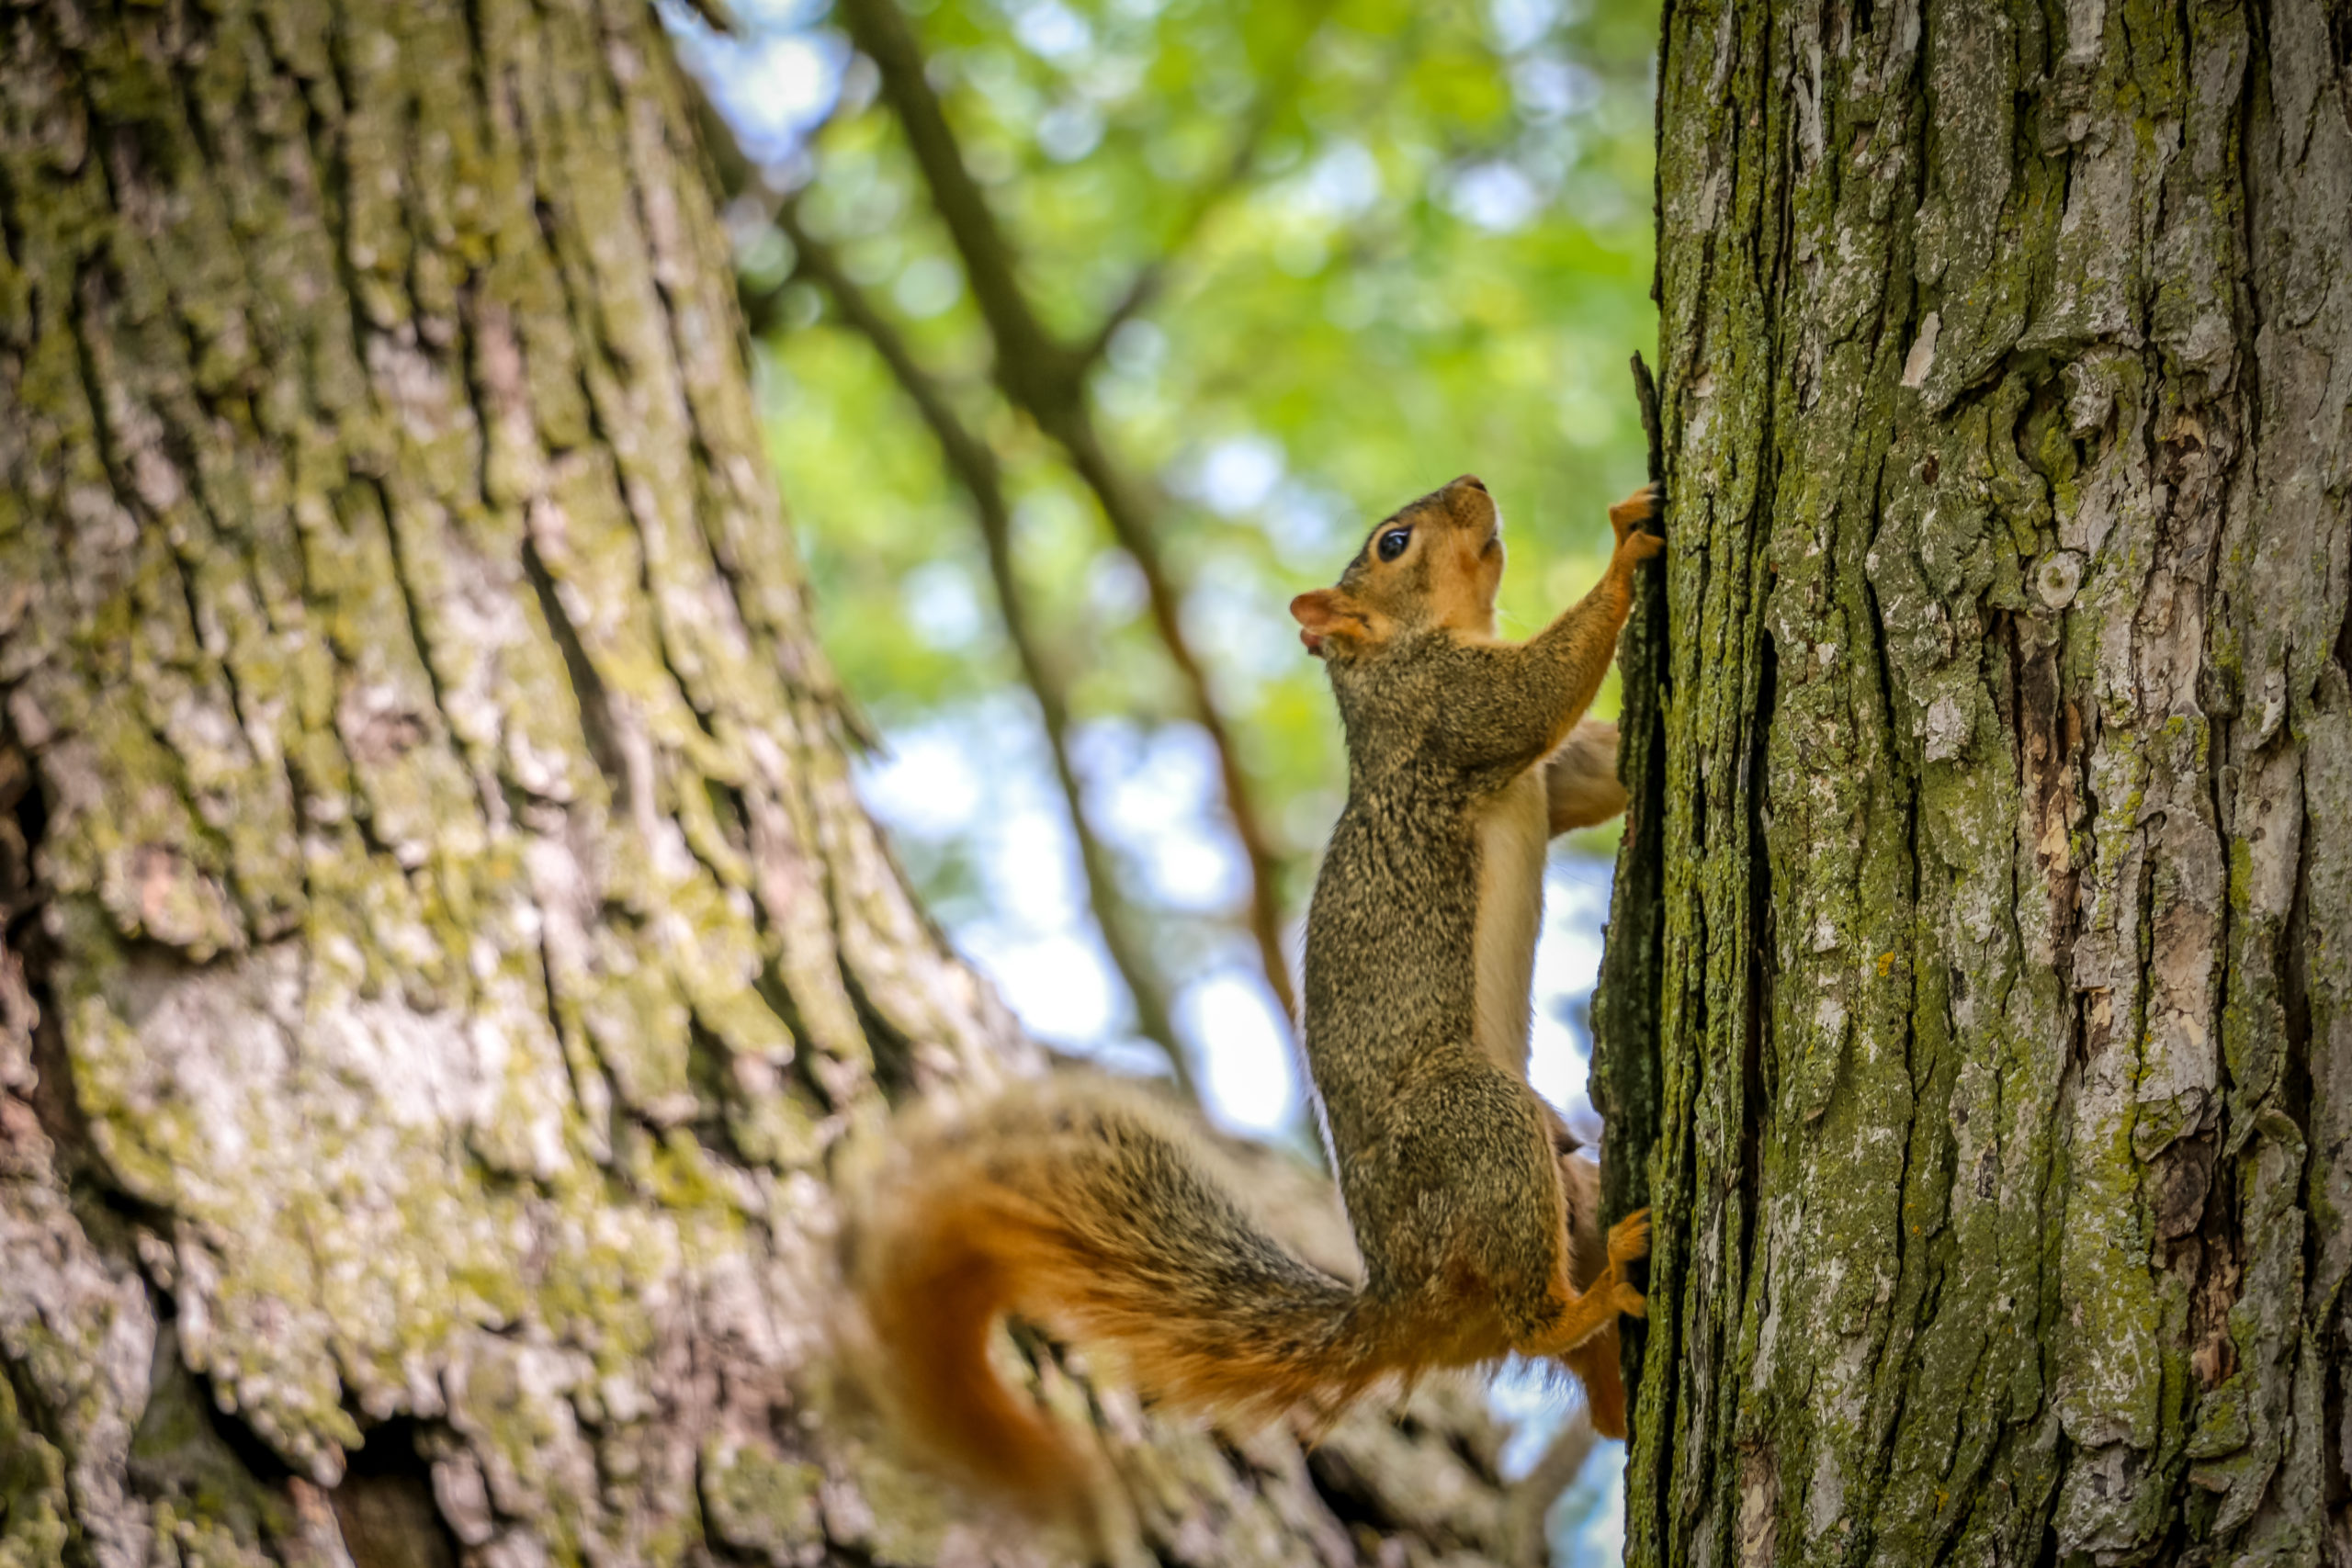 A squirrel climbing up a tree